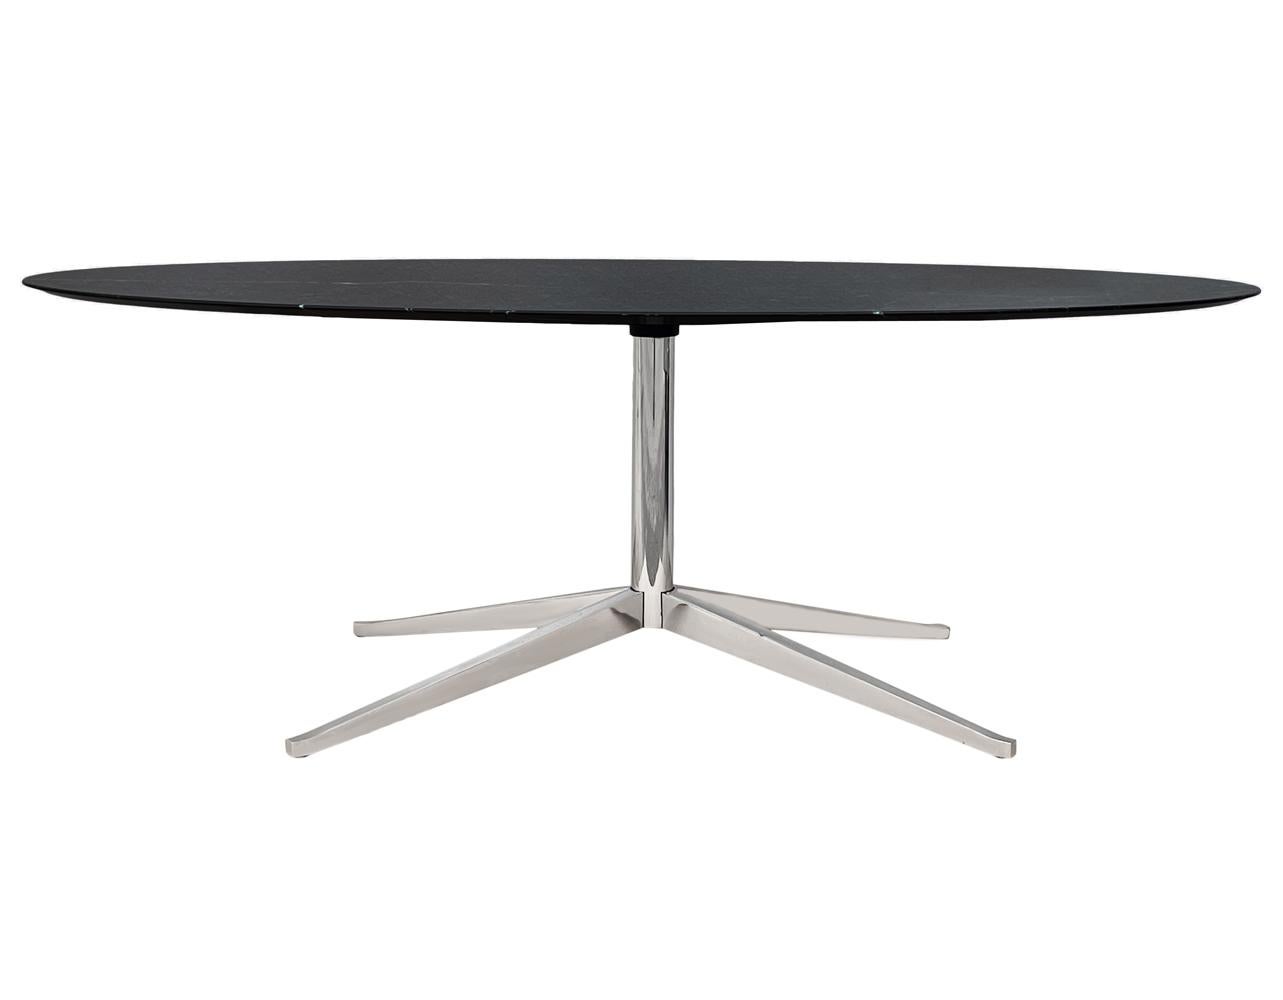 An elegant executive table designed by Florence Knoll and produced by Knoll. It features a beautiful high gloss Nero Marquina black marble top and a chrome-plated star base. This was one of the most expensive marble options for this table. Signed